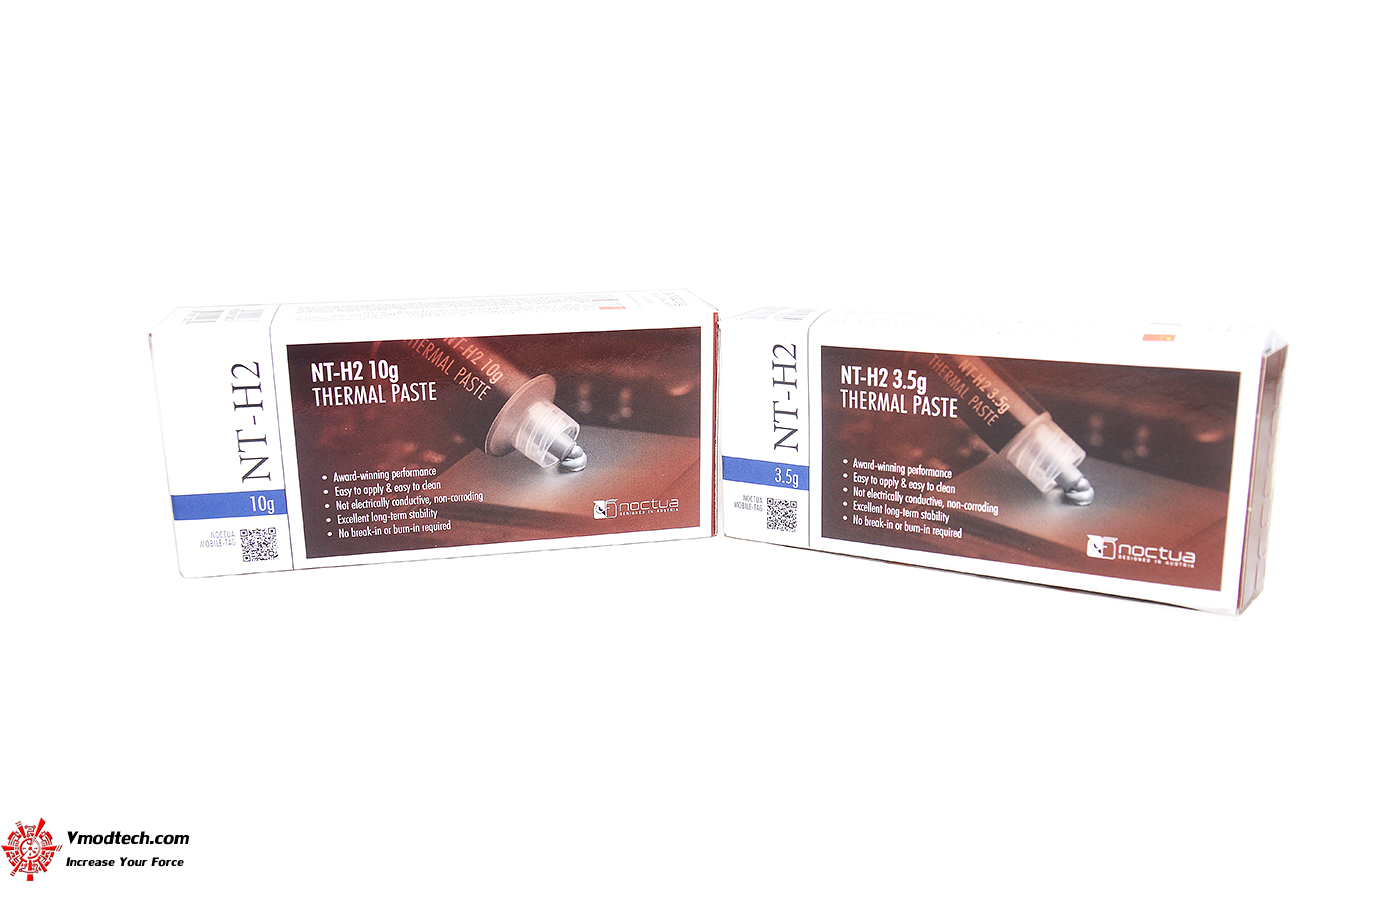 dsc 4804 Noctua NT H2 10g and 3.5g Thermal Paste Review